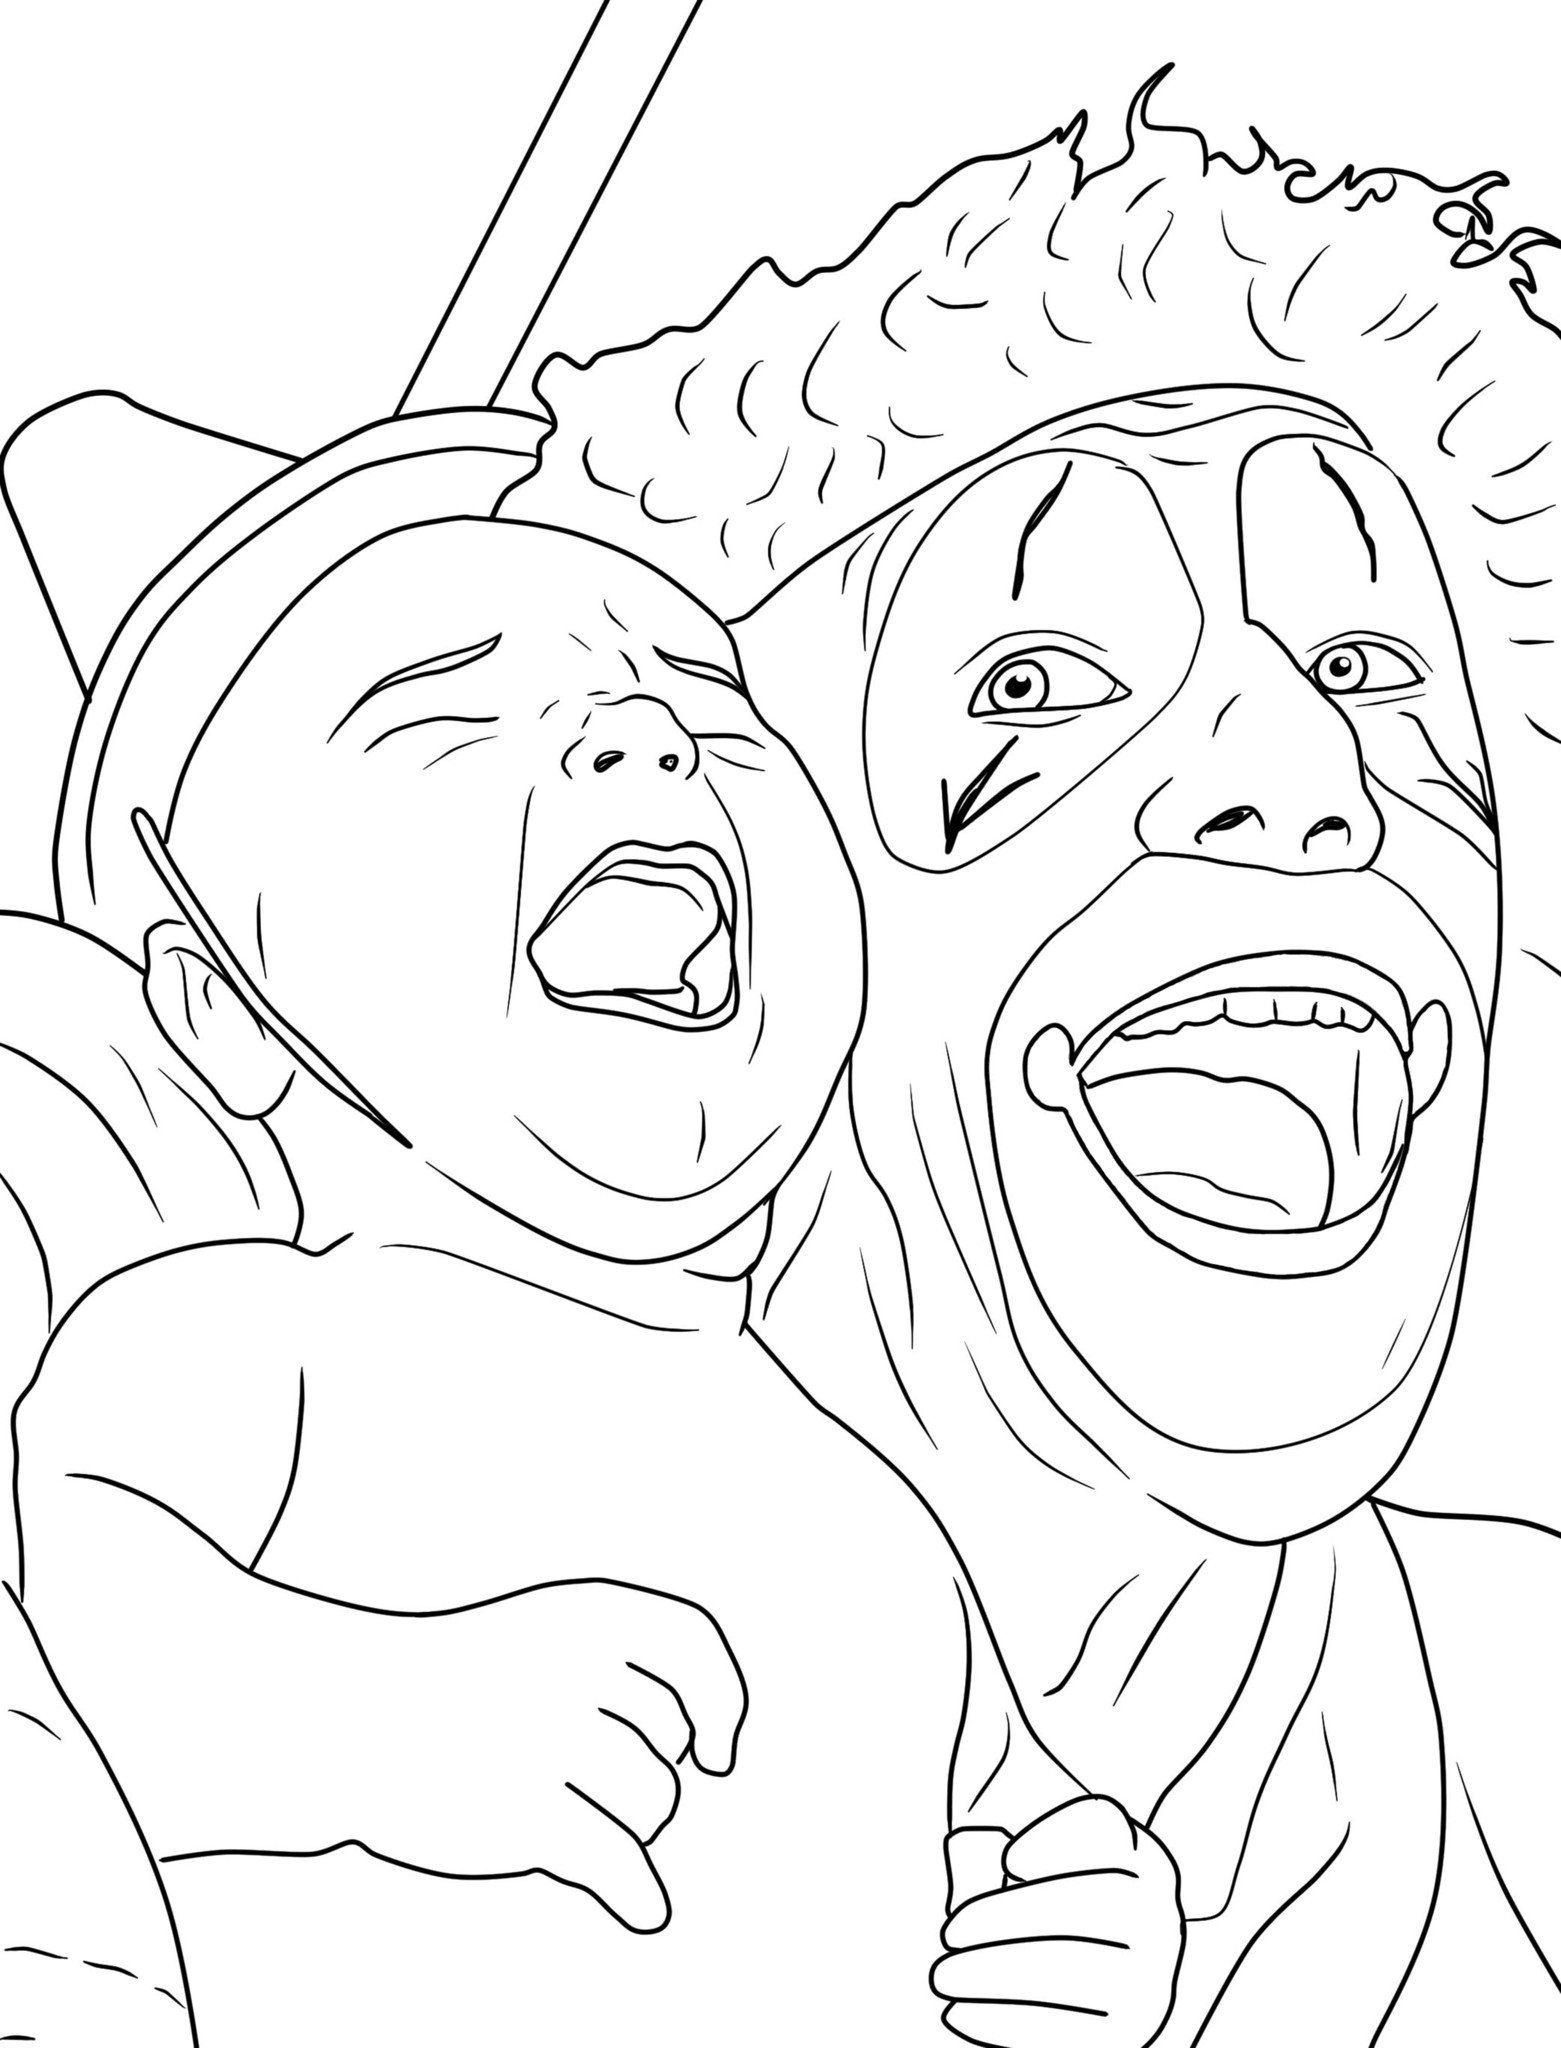 clown coloring pages for adults